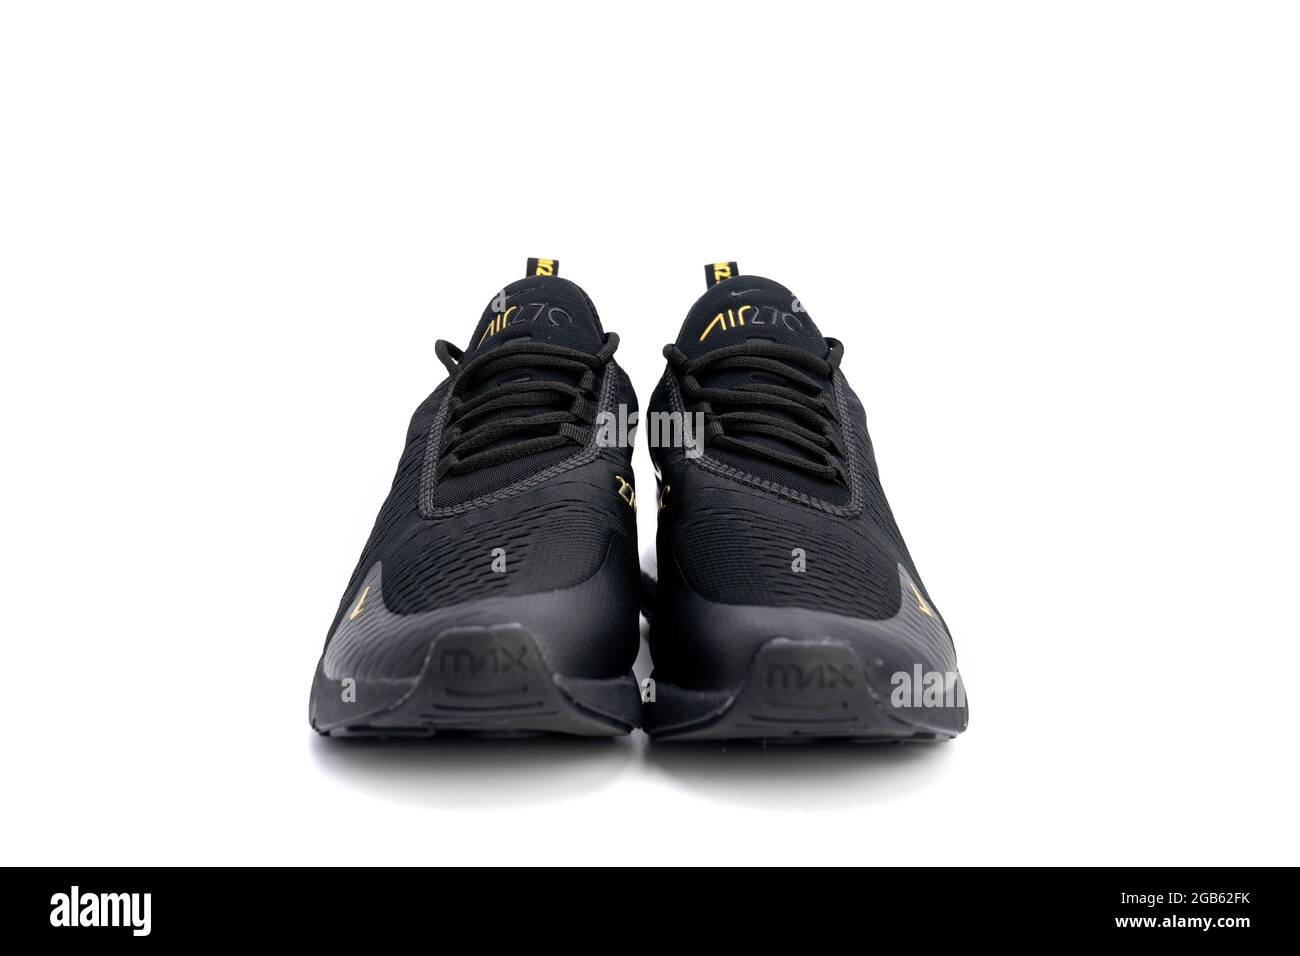 Bangkok, Thailand - 23 Mar 2020, Nike air max 270 black and gold adult's sport shoes, sneakers, trainers detailed close up shot on studio light white Stock Photo Alamy